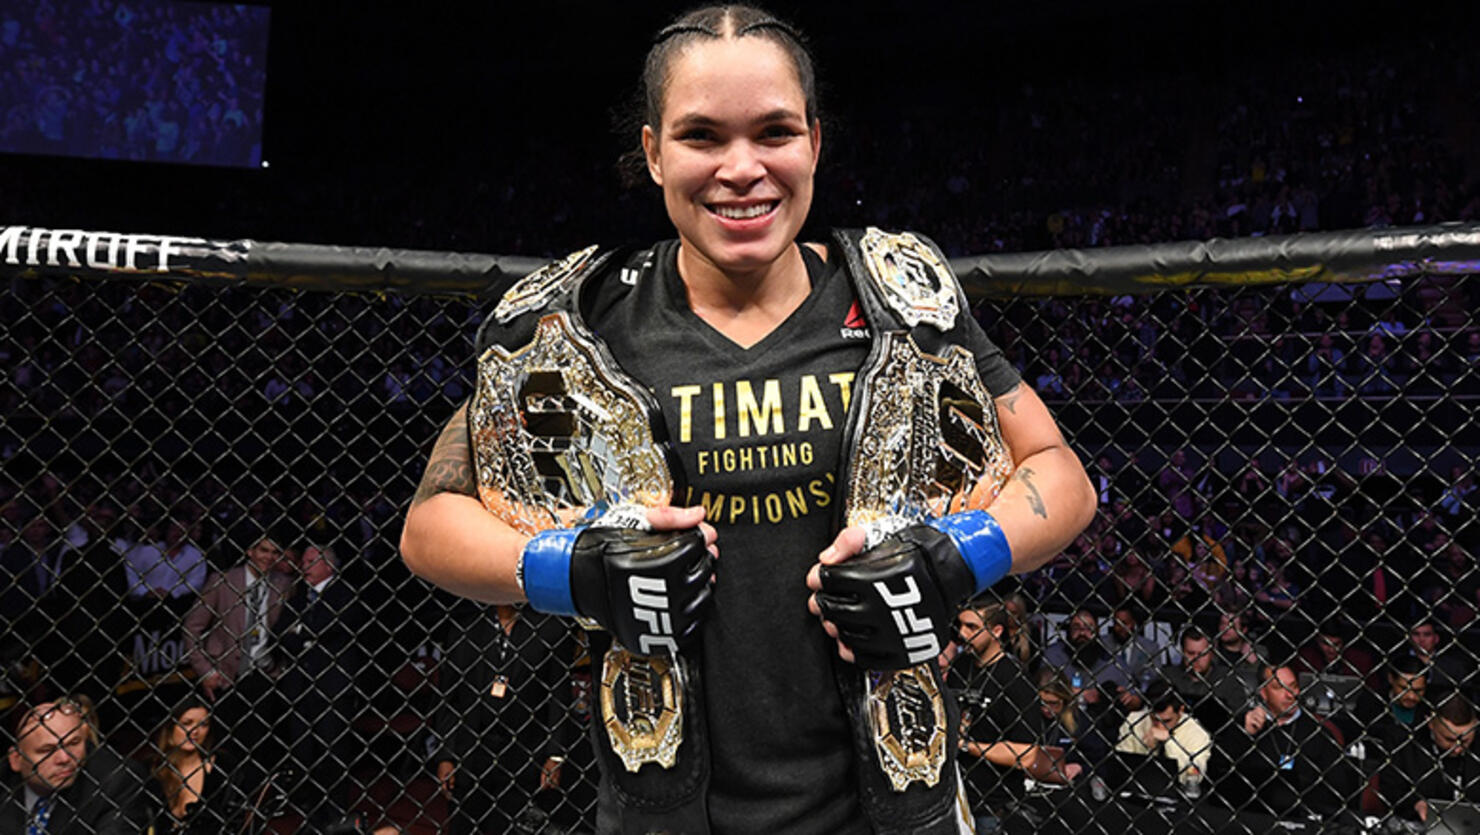 Amanda Nunes of Brazil celebrates her KO victory over Cris Cyborg of Brazil in their women's featherweight bout during the UFC 232 event inside The Forum